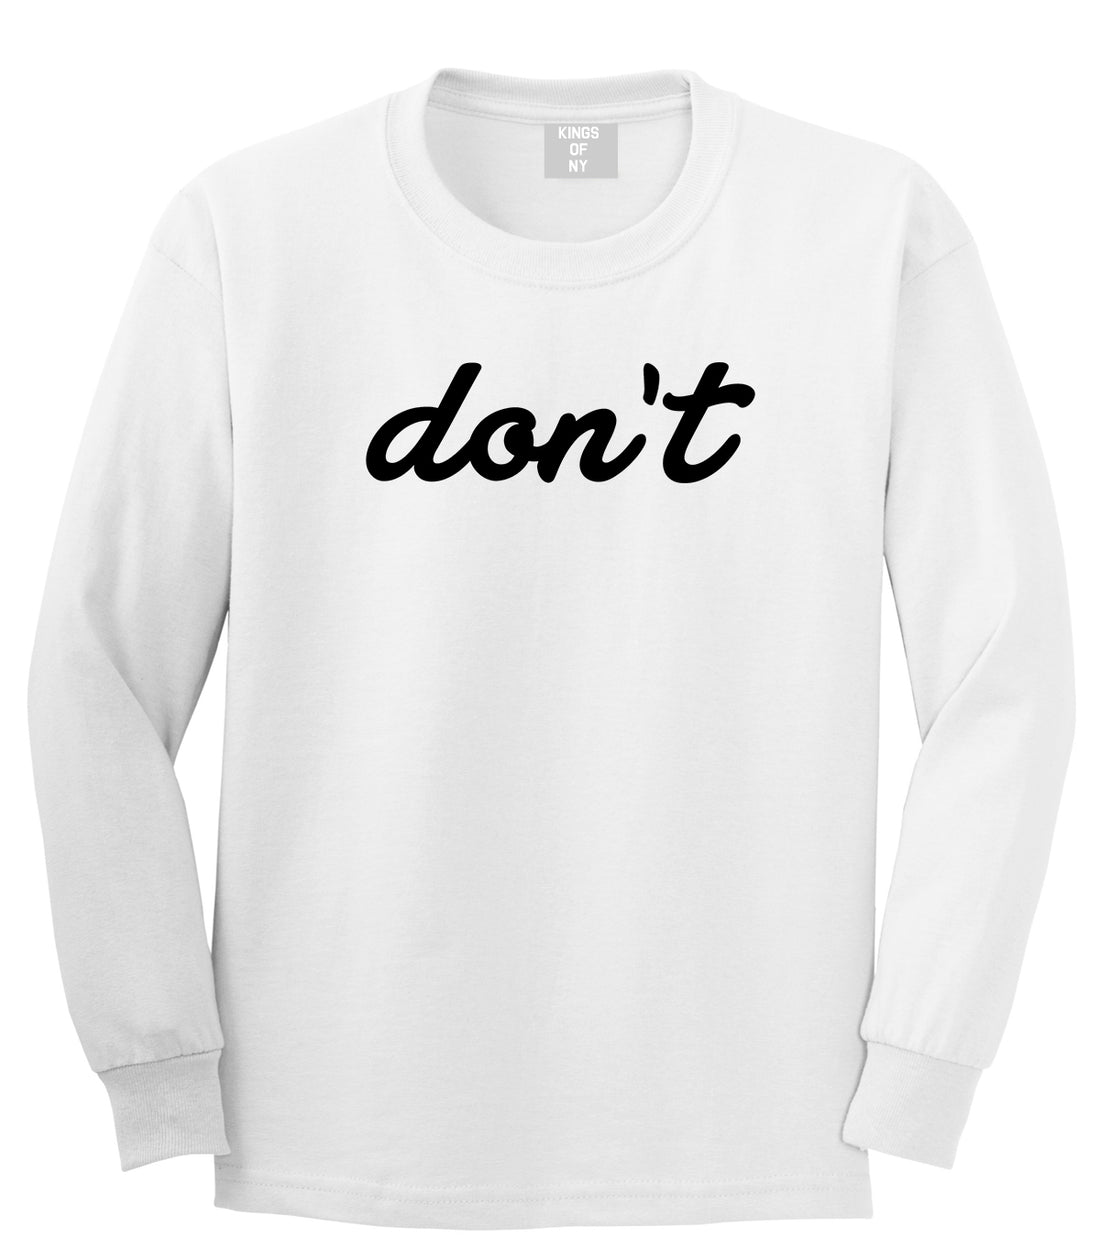 Dont Script Printed Mens White Long Sleeve T-Shirt by Kings Of NY